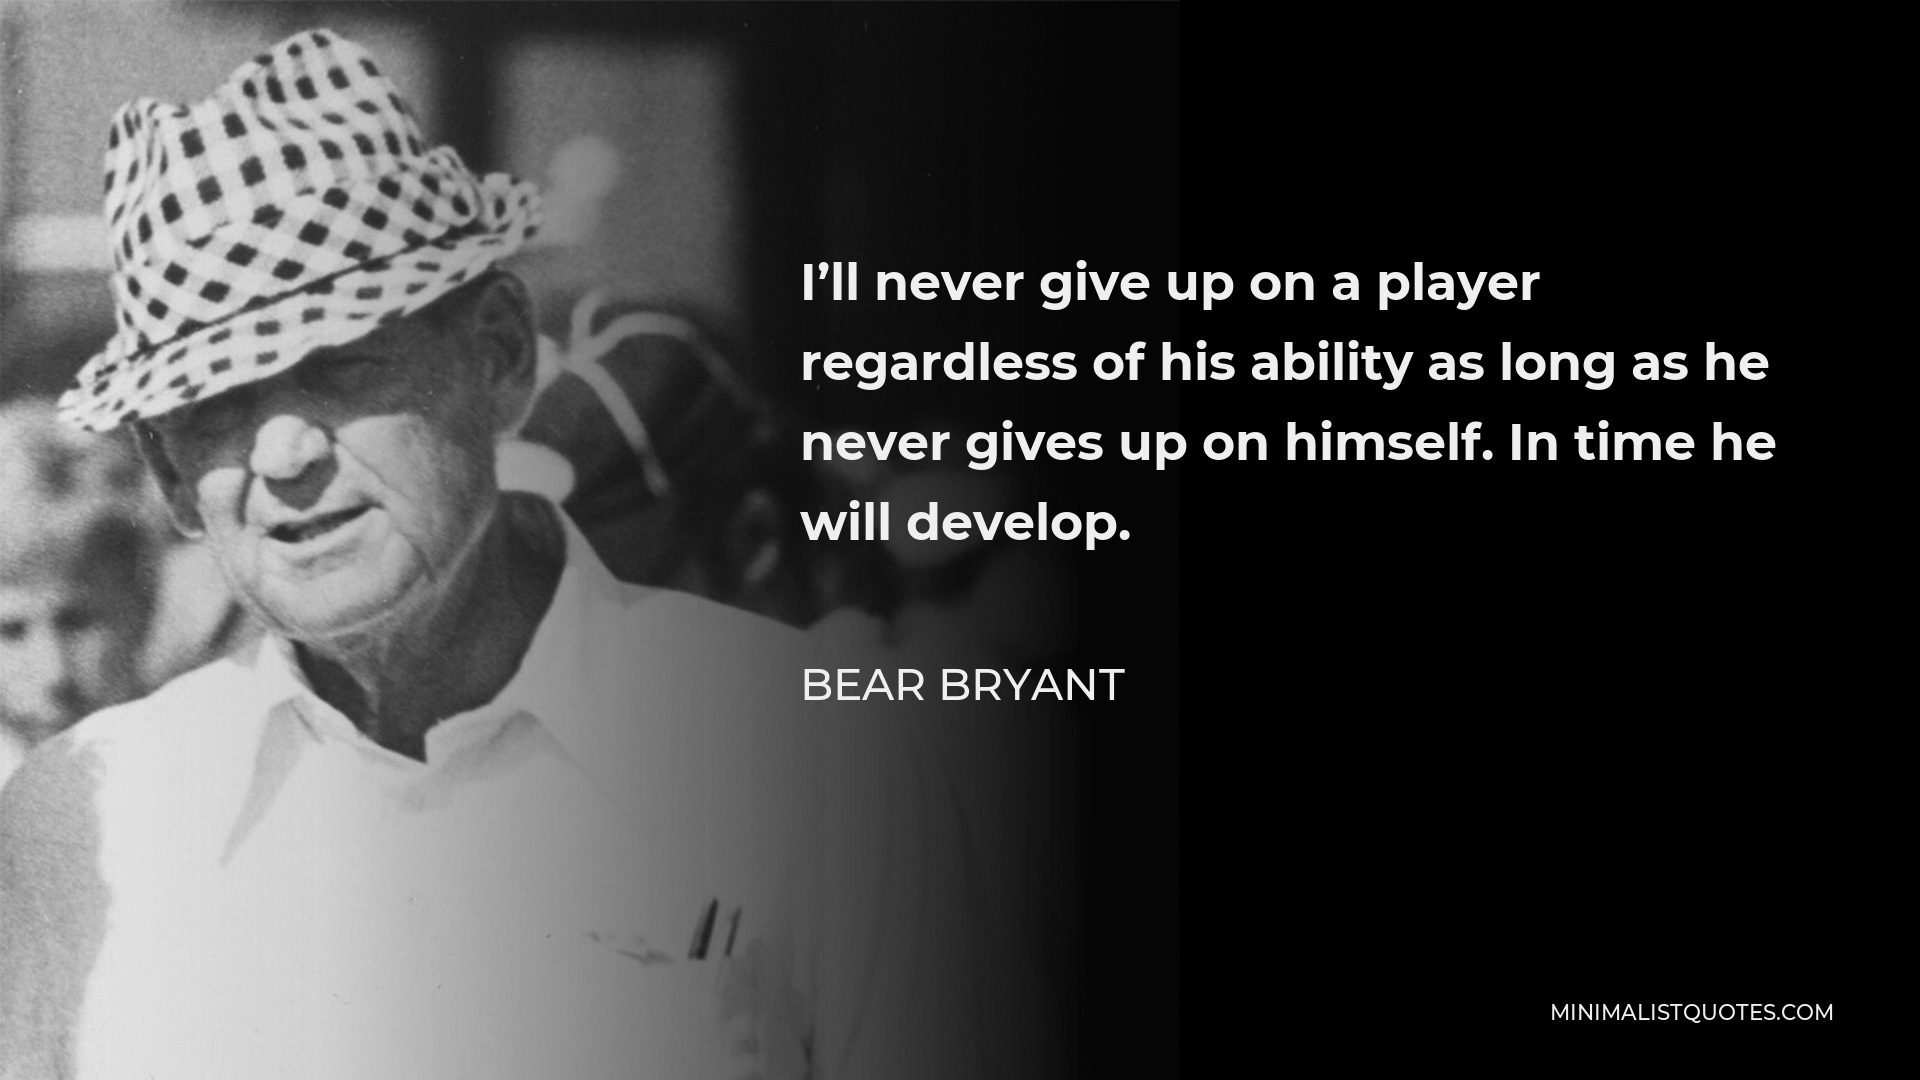 Bear Bryant Quote - I’ll never give up on a player regardless of his ability as long as he never gives up on himself. In time he will develop.